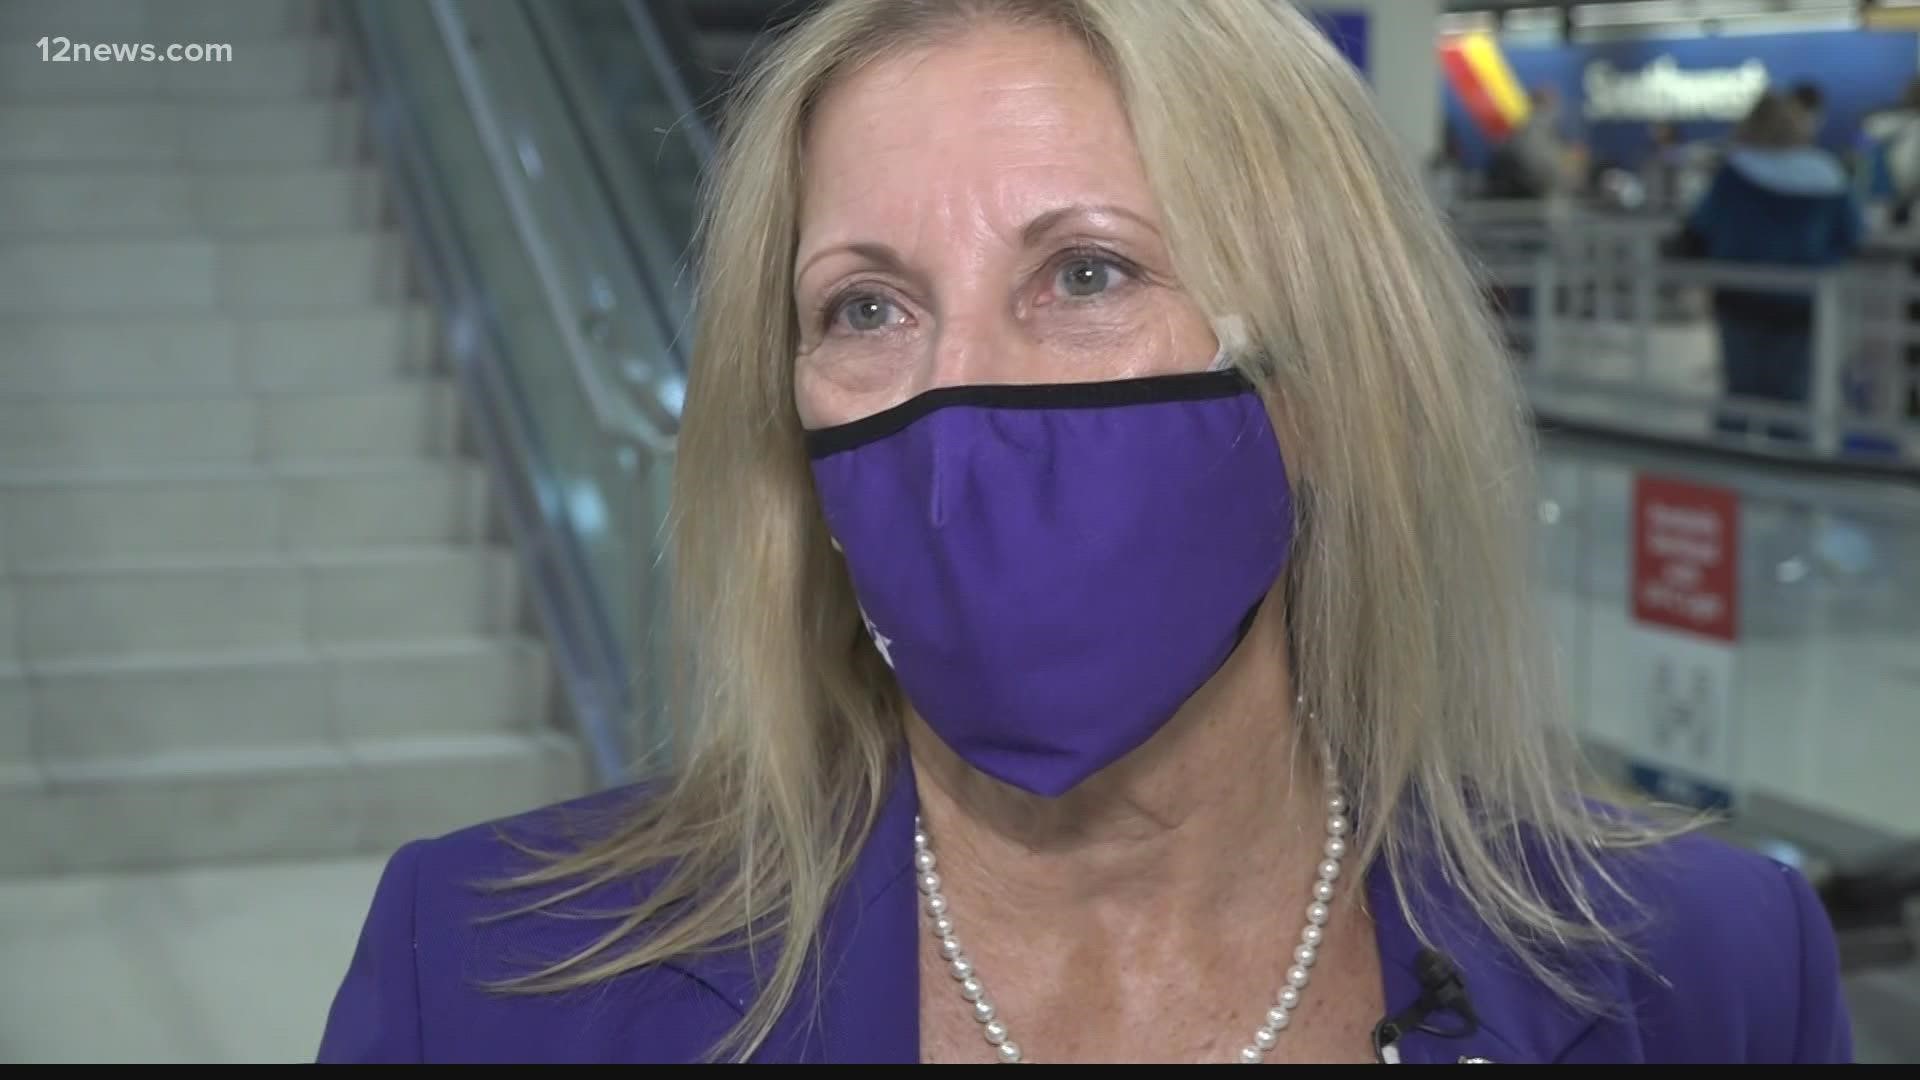 This year, the Navigator program at Phoenix Sky Harbor is celebrating 21 years and Diane Hansen has been with them for 17 of those years.